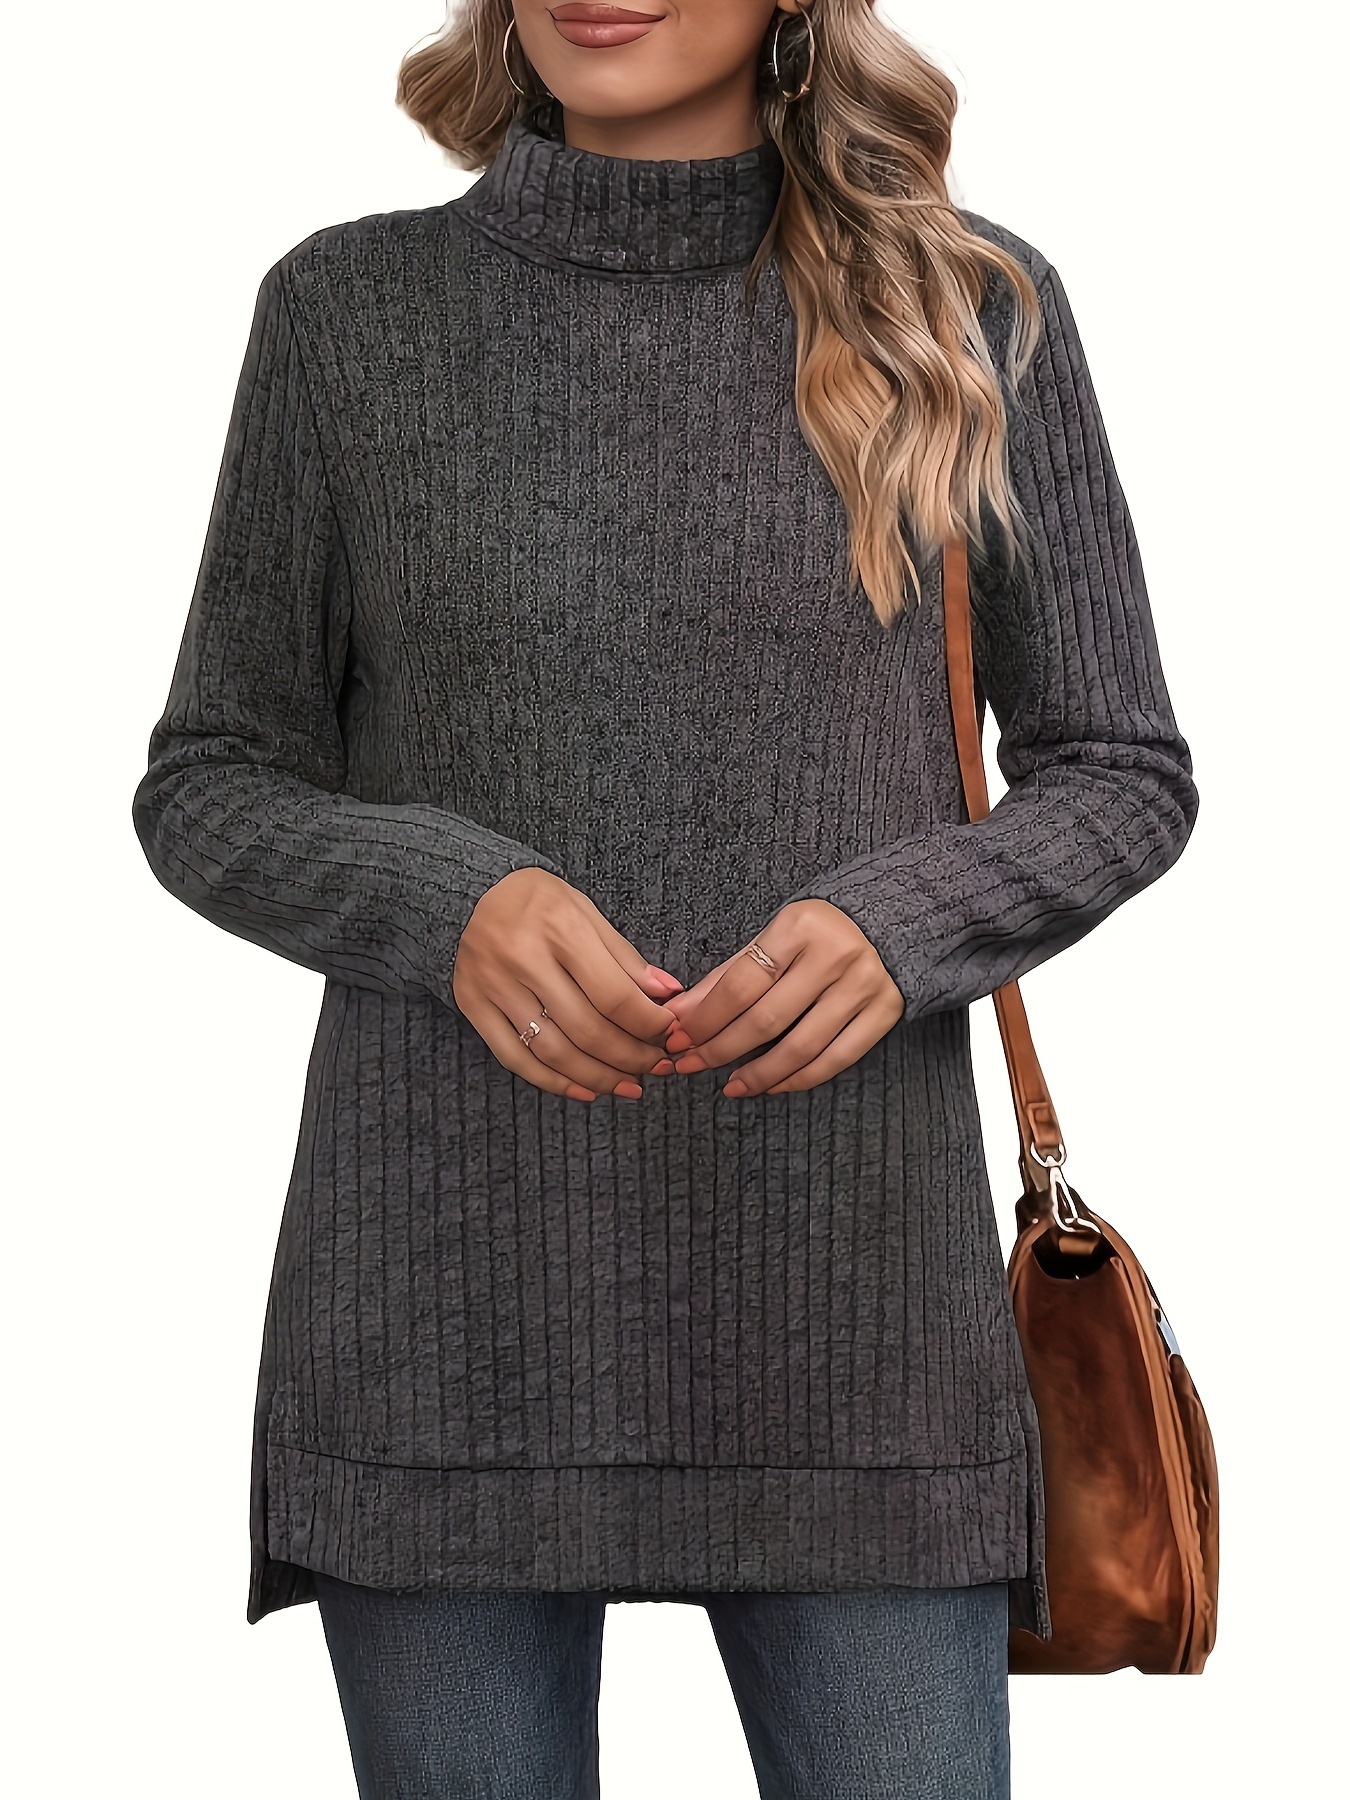 COLLUSION rib knit turtle neck sweater in steely gray